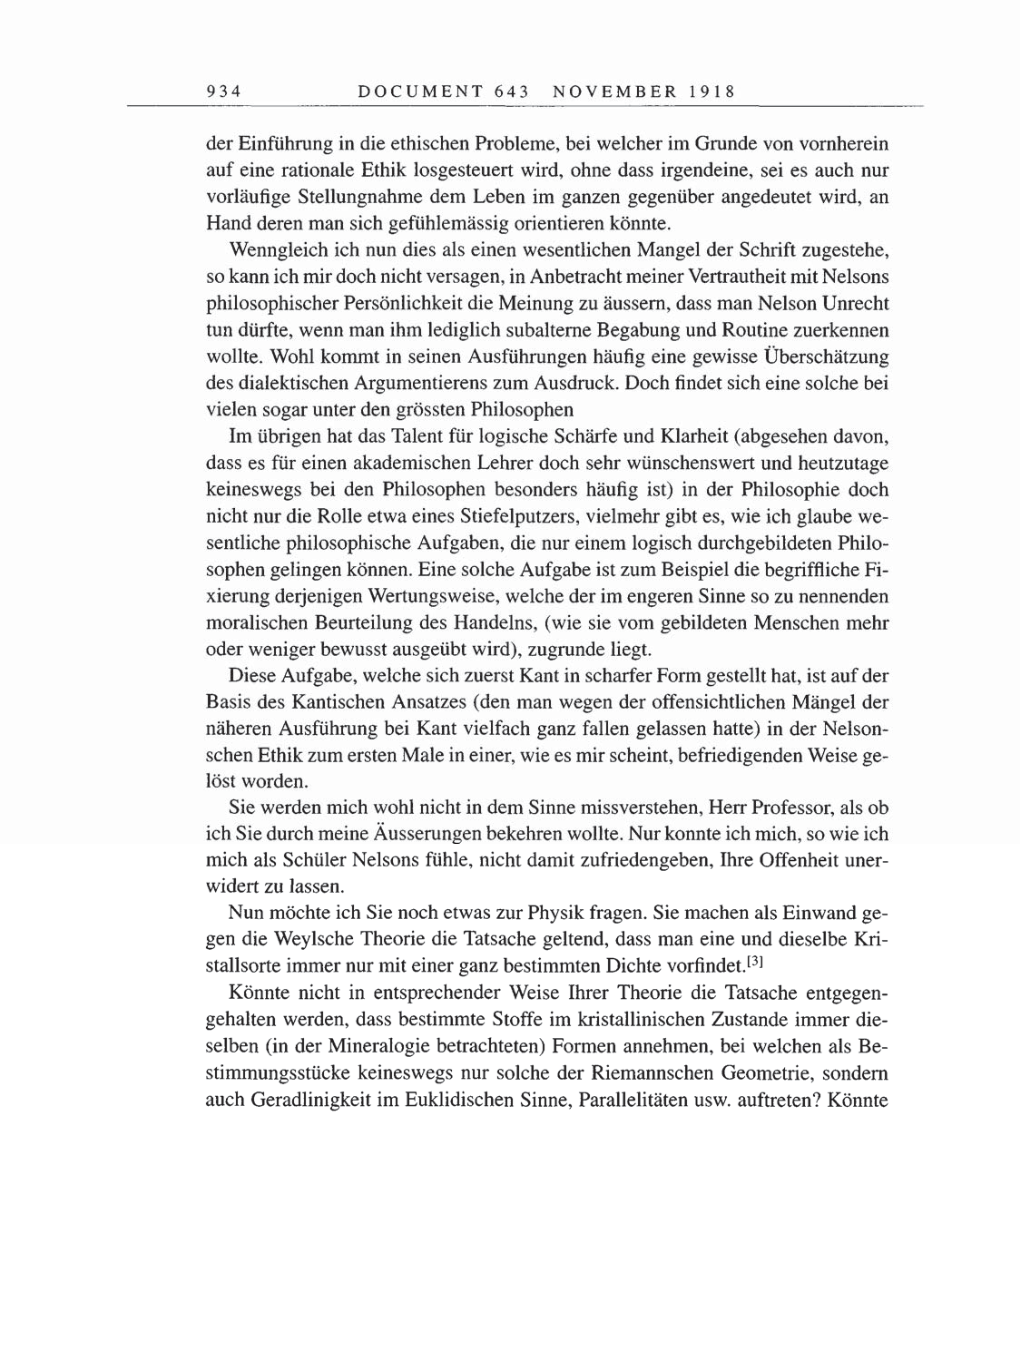 Volume 8, Part B: The Berlin Years: Correspondence 1918 page 934